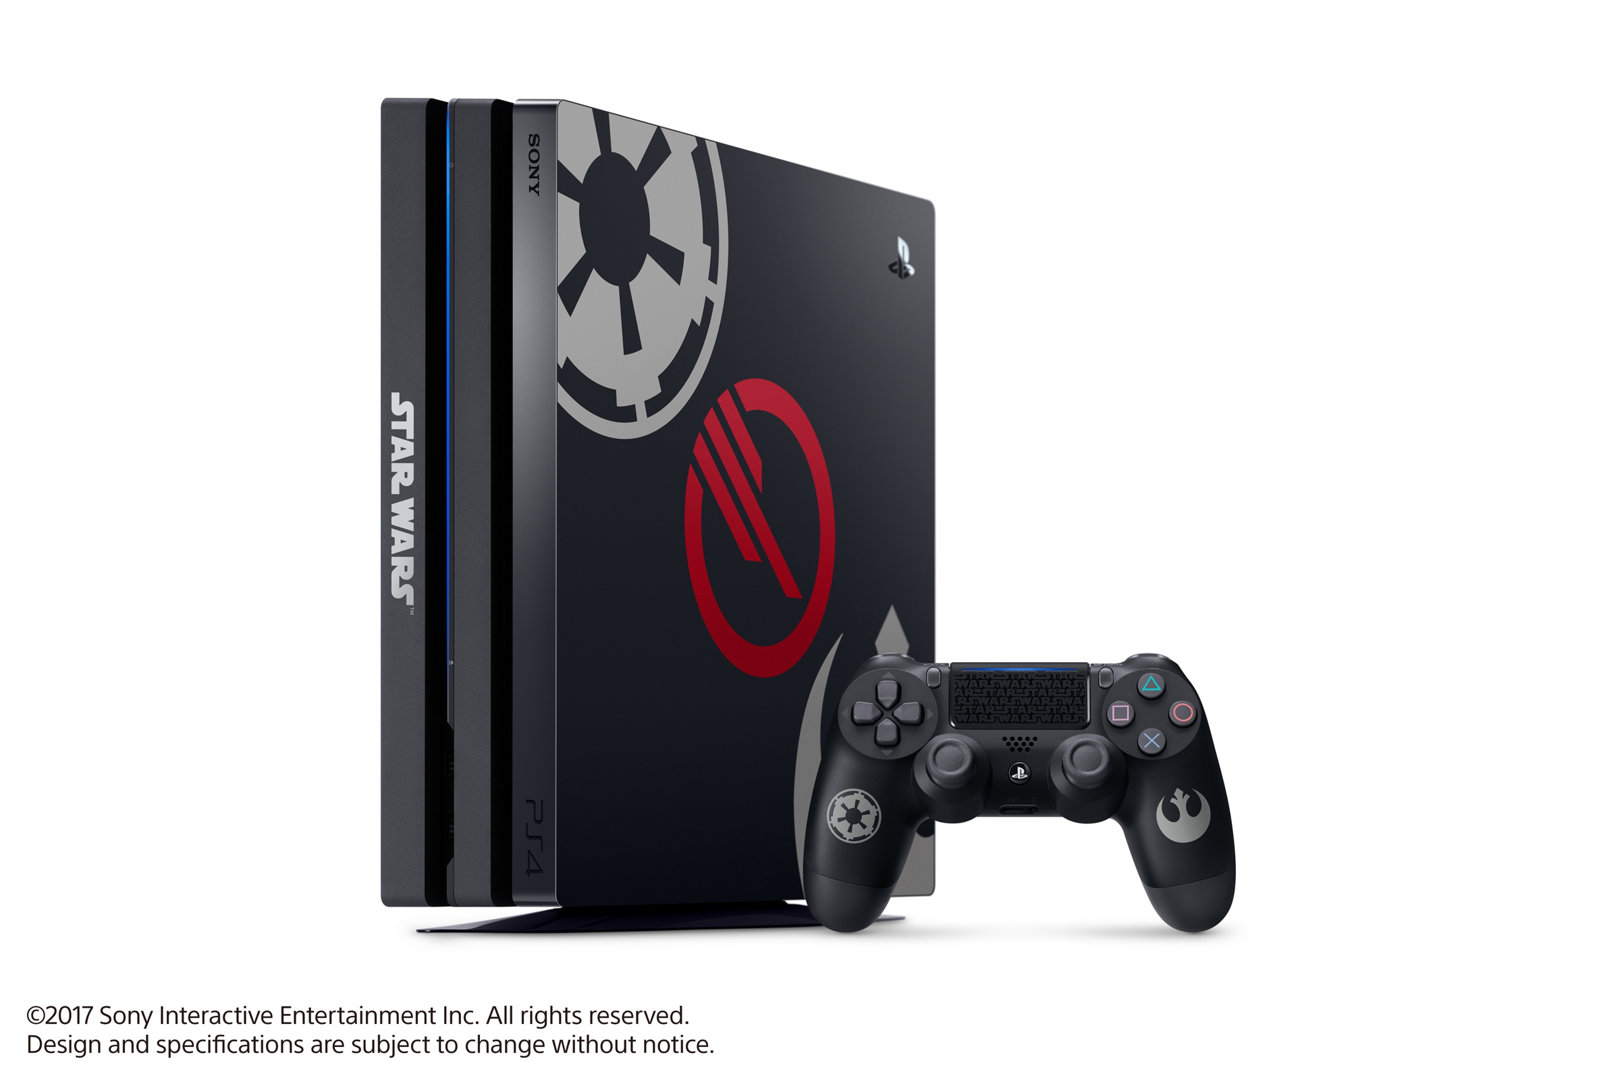 limited-edition-star-wars-battlefront-ii-ps4-pro-bundle-product-shot-04-ps4-us-12oct17